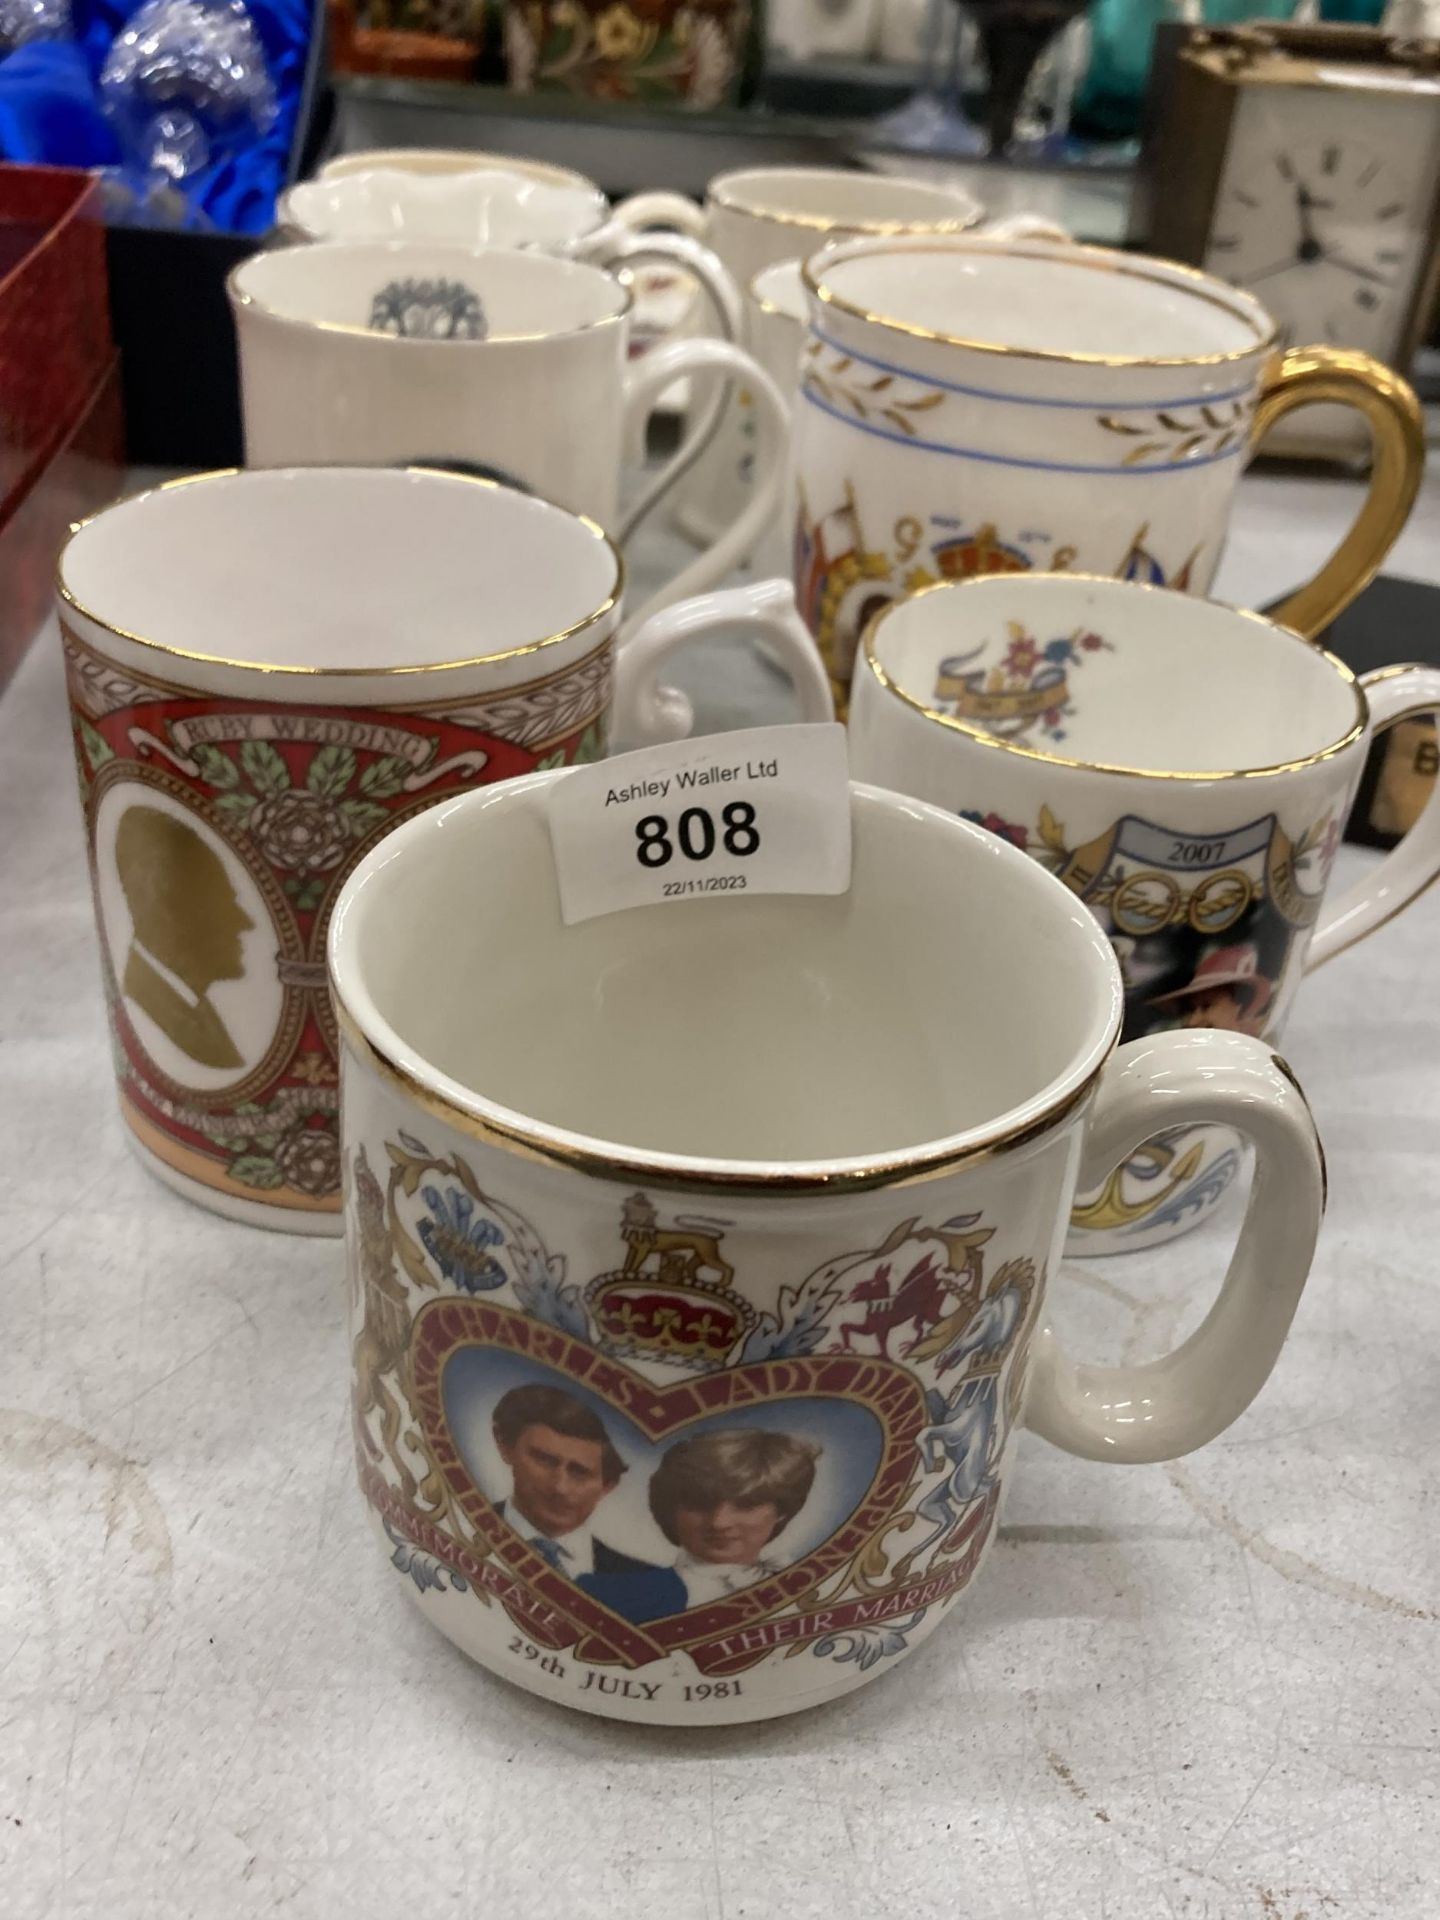 A COLLECTION OF ROYAL COMMEMORATIVE MUGS AND CUPS PLUS A PLATE - Image 2 of 3